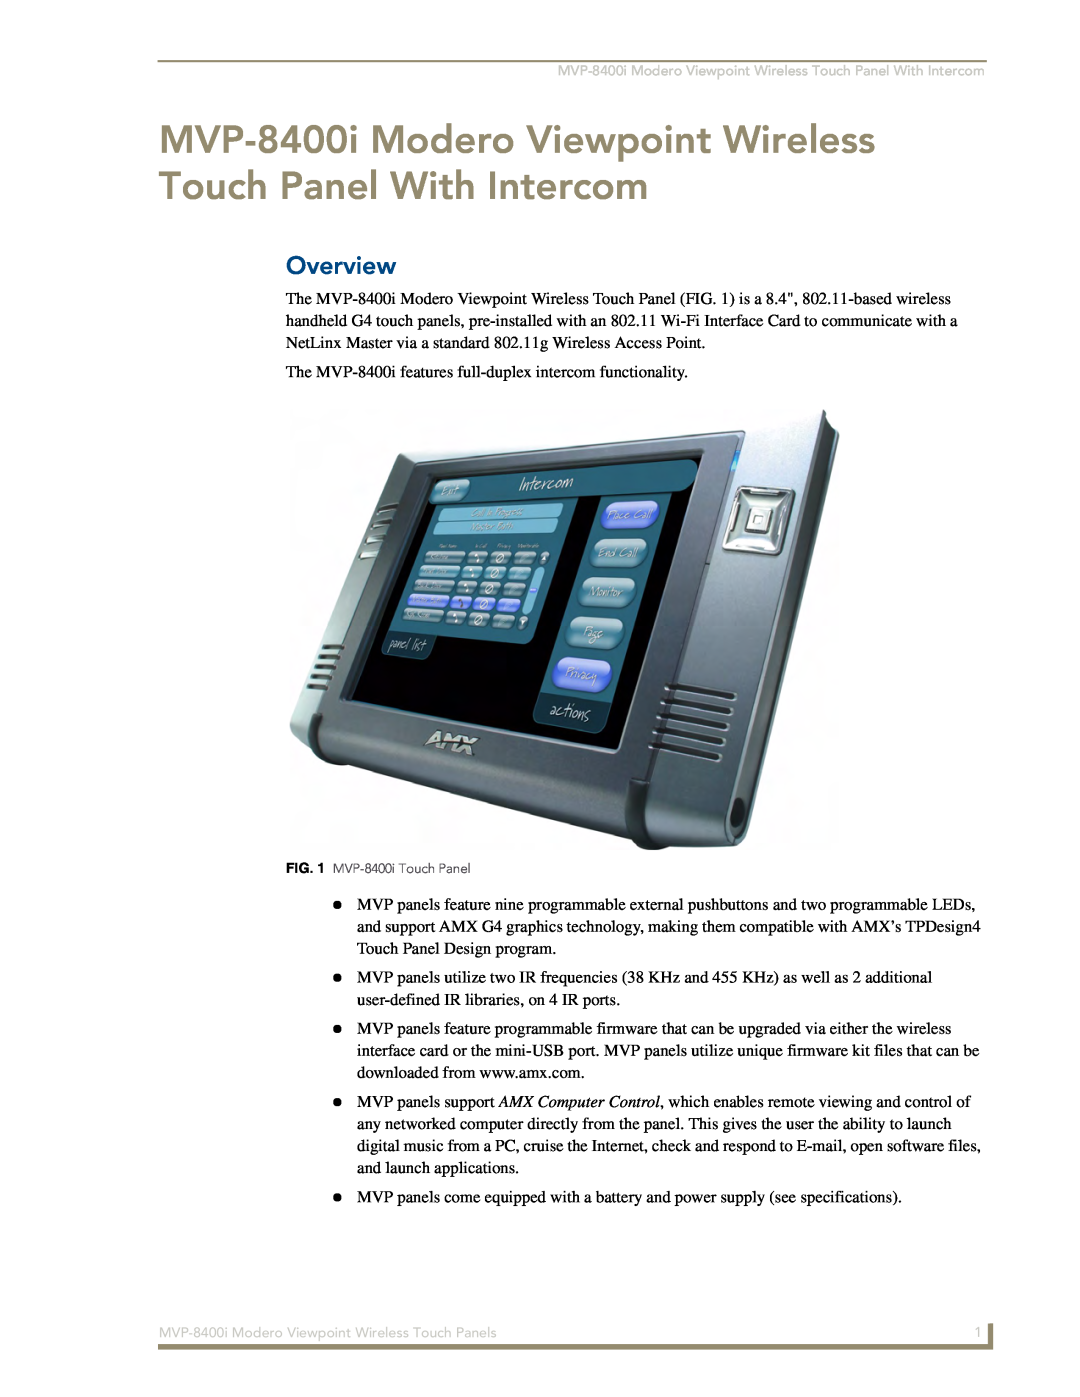 AMX manual MVP-8400i Modero Viewpoint Wireless Touch Panel With Intercom, Overview 